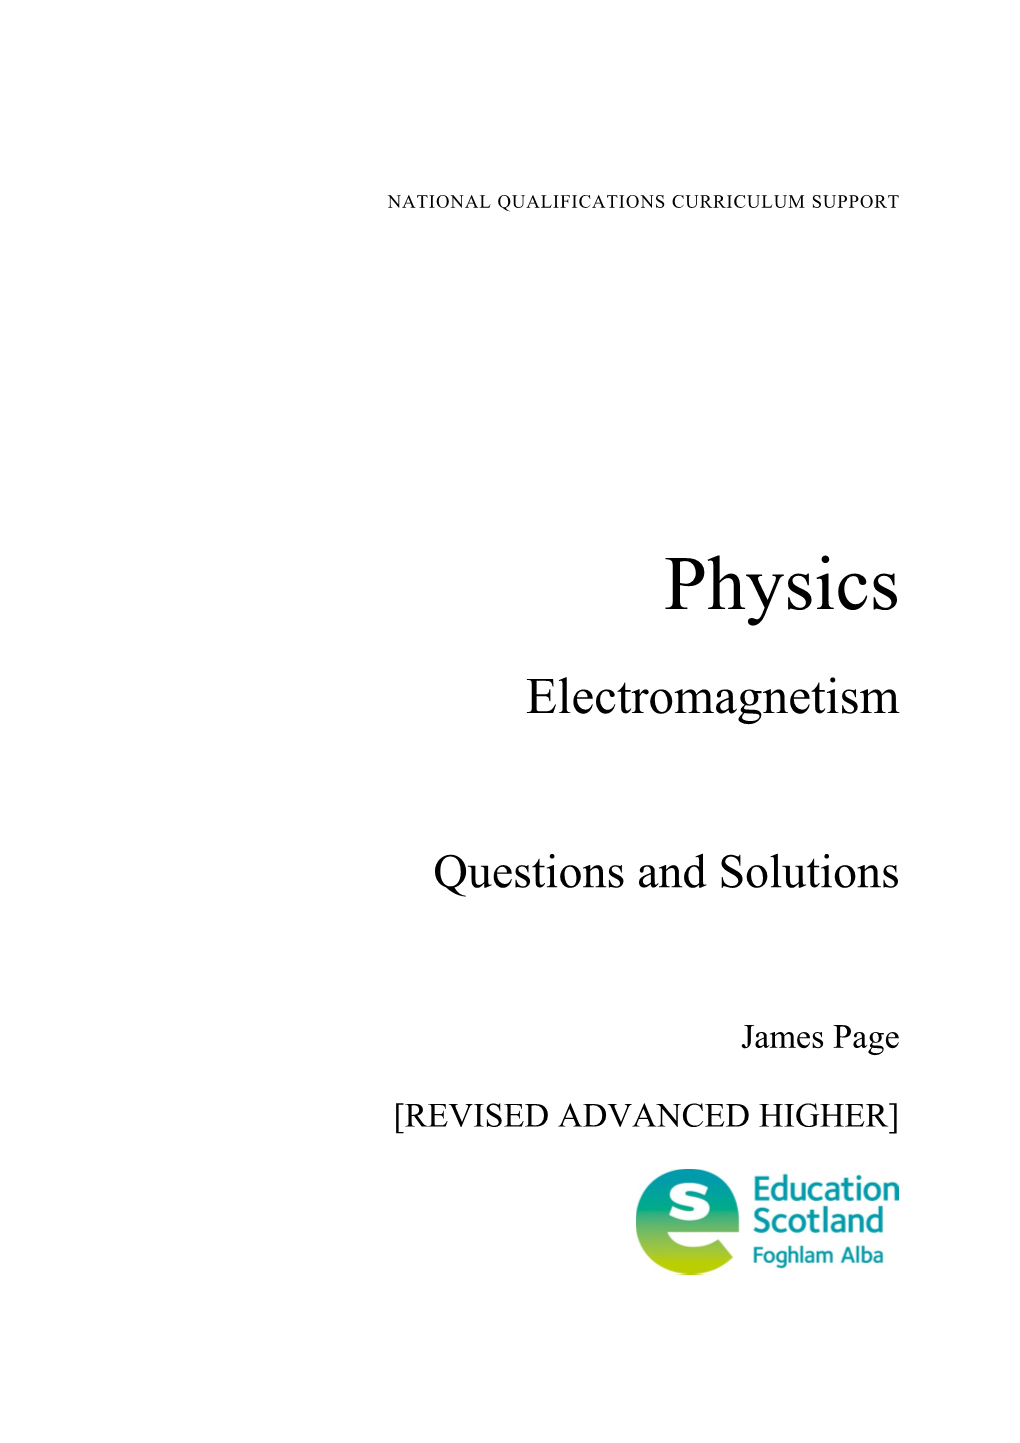 Physics - Electromagnetism: Questions and Solutions (Revised Advanced Higher)